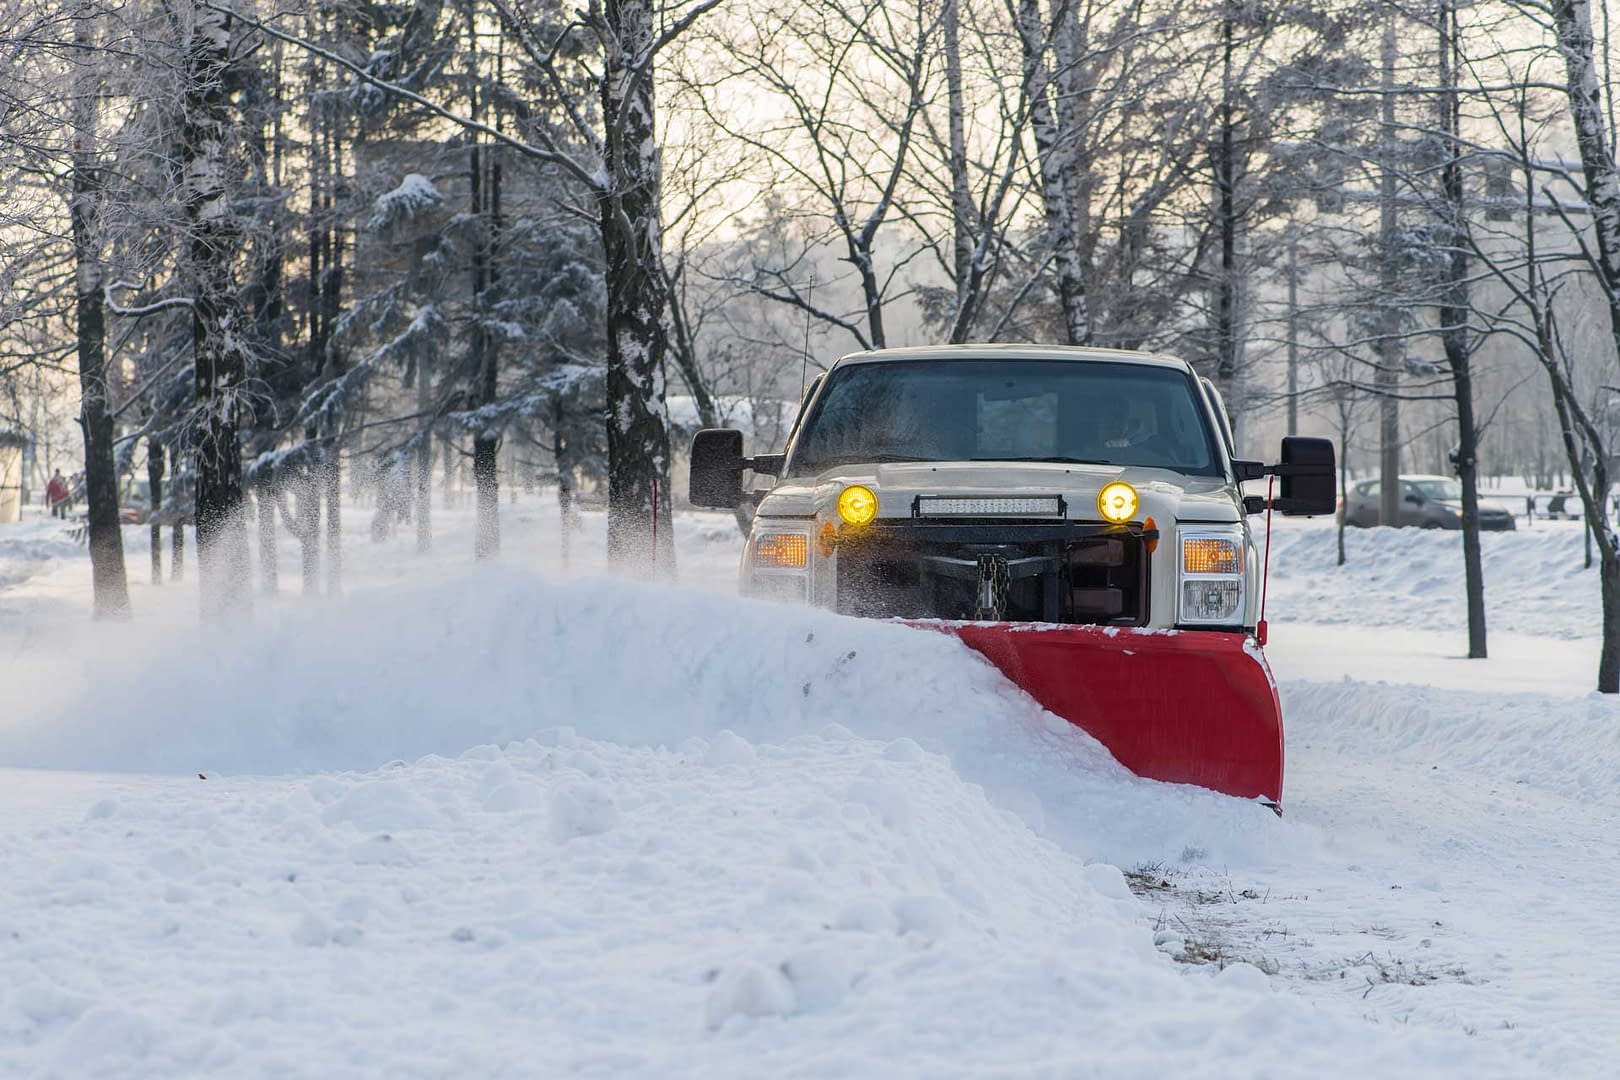 Snow Plowing Insurance: What You Need to Know